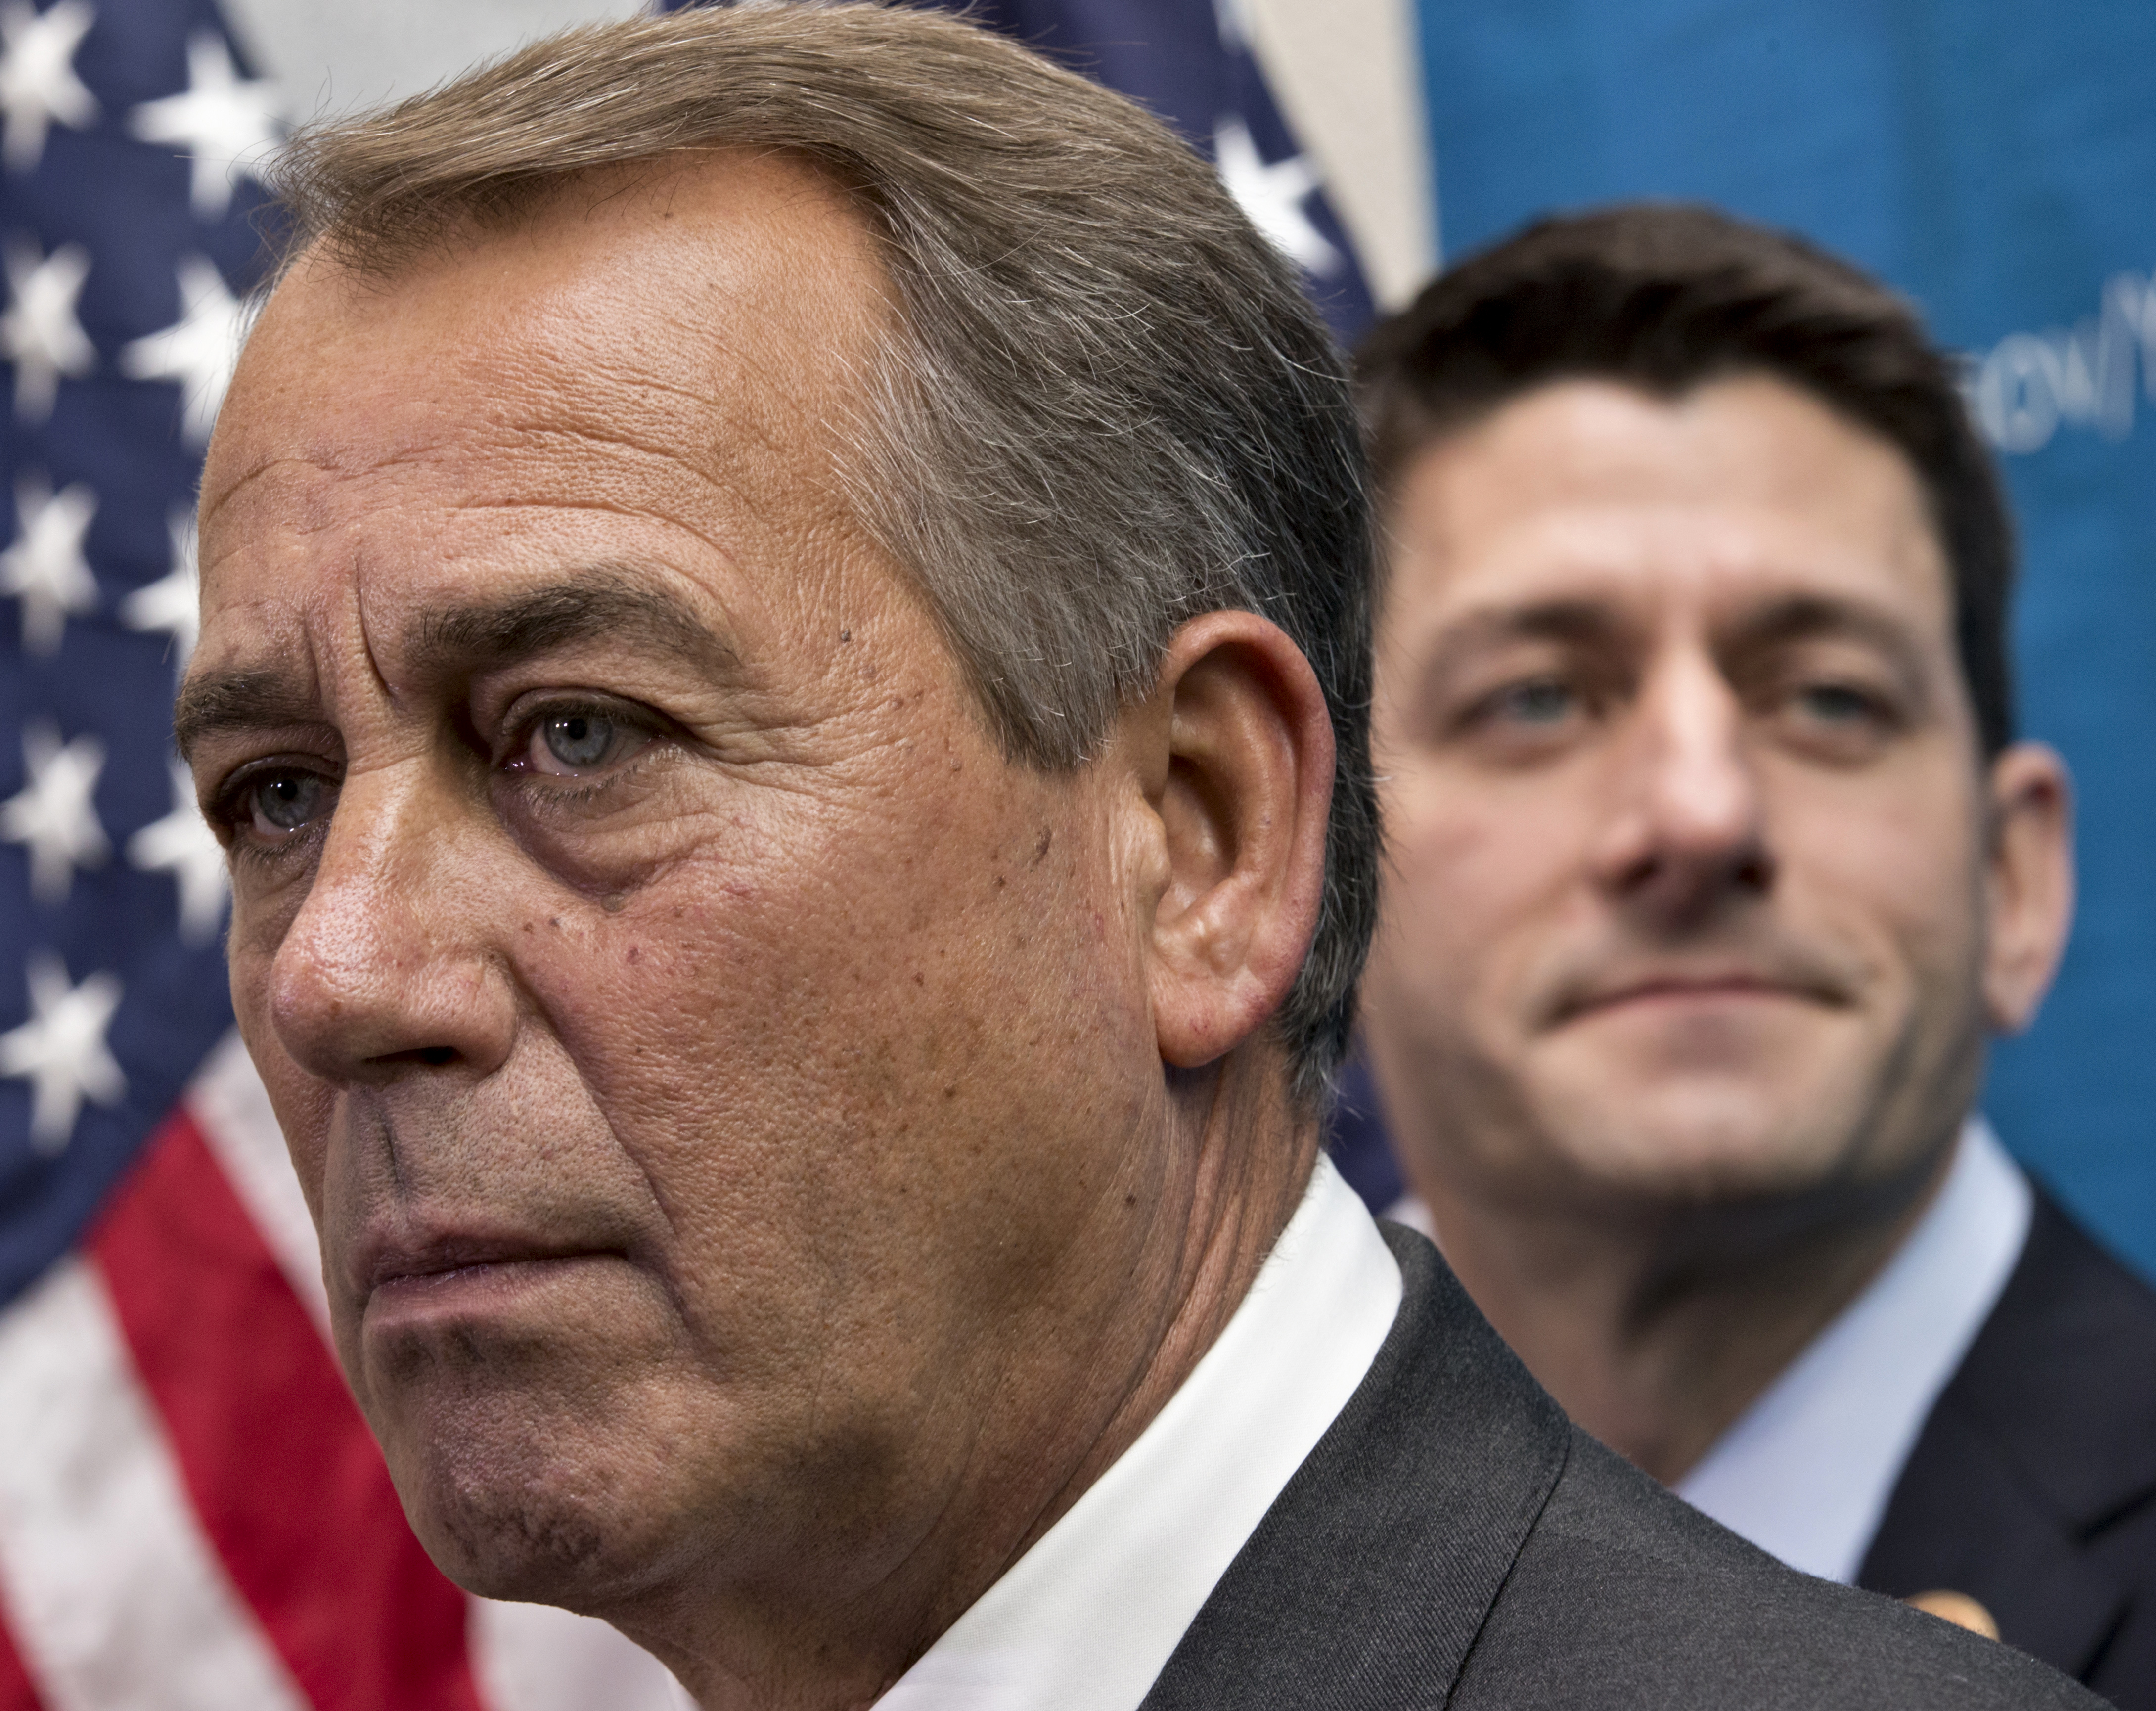 From left: House Speaker John Boehner of Ohio joined by House Budget Committee Chairman Rep. Paul Ryan takes reporters' questions, on Capitol Hill in Washington, D.C., on Dec. 11, 2013. (J. Scott Applewhite / AP)